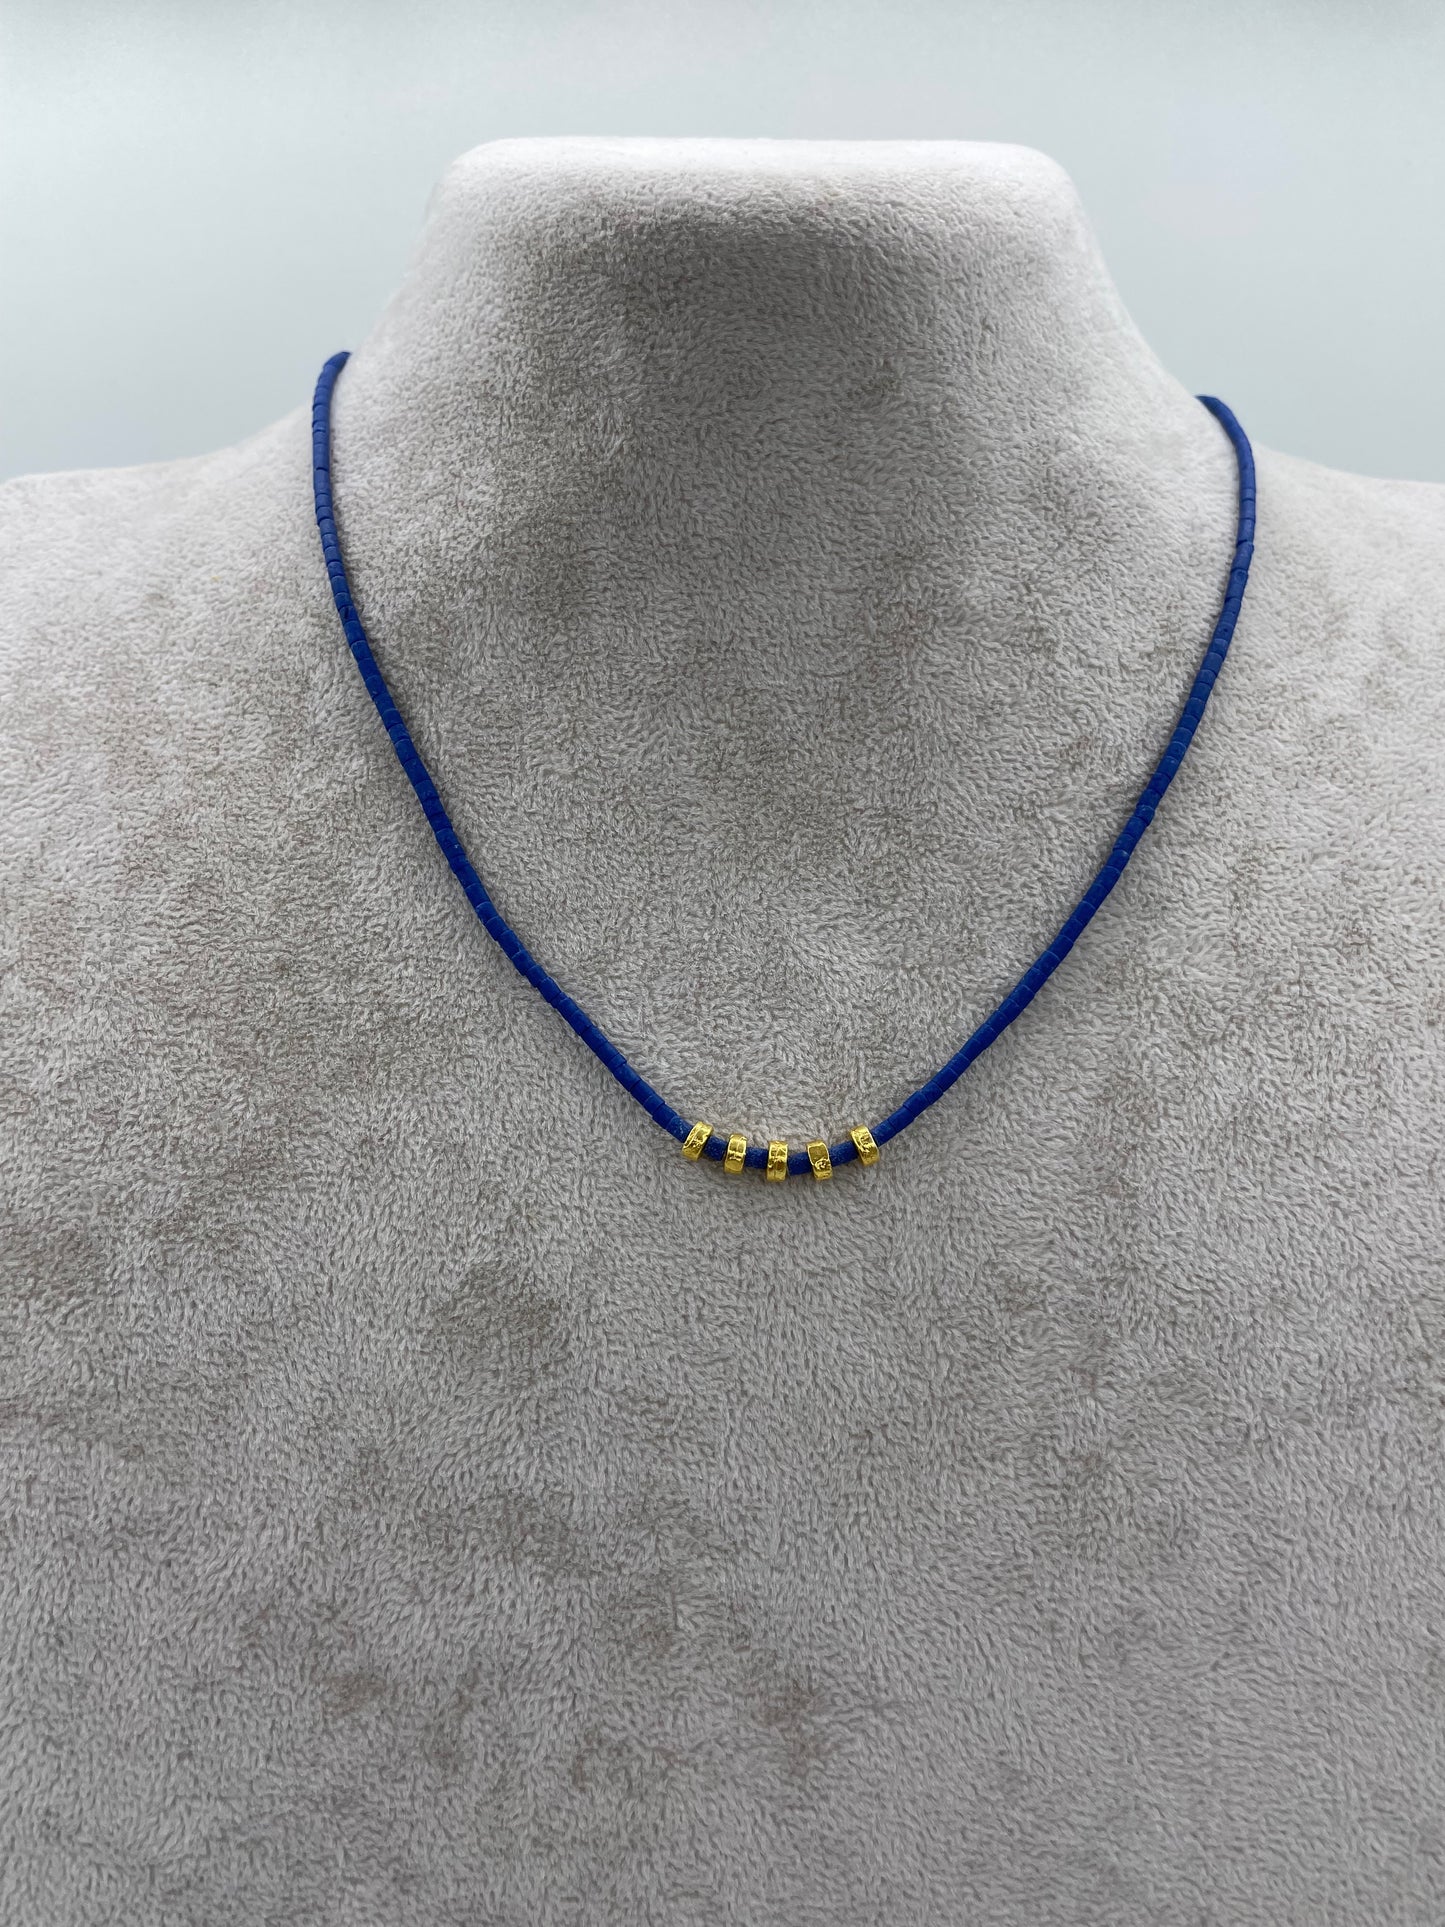 Lapis necklace with hammered gold spacers